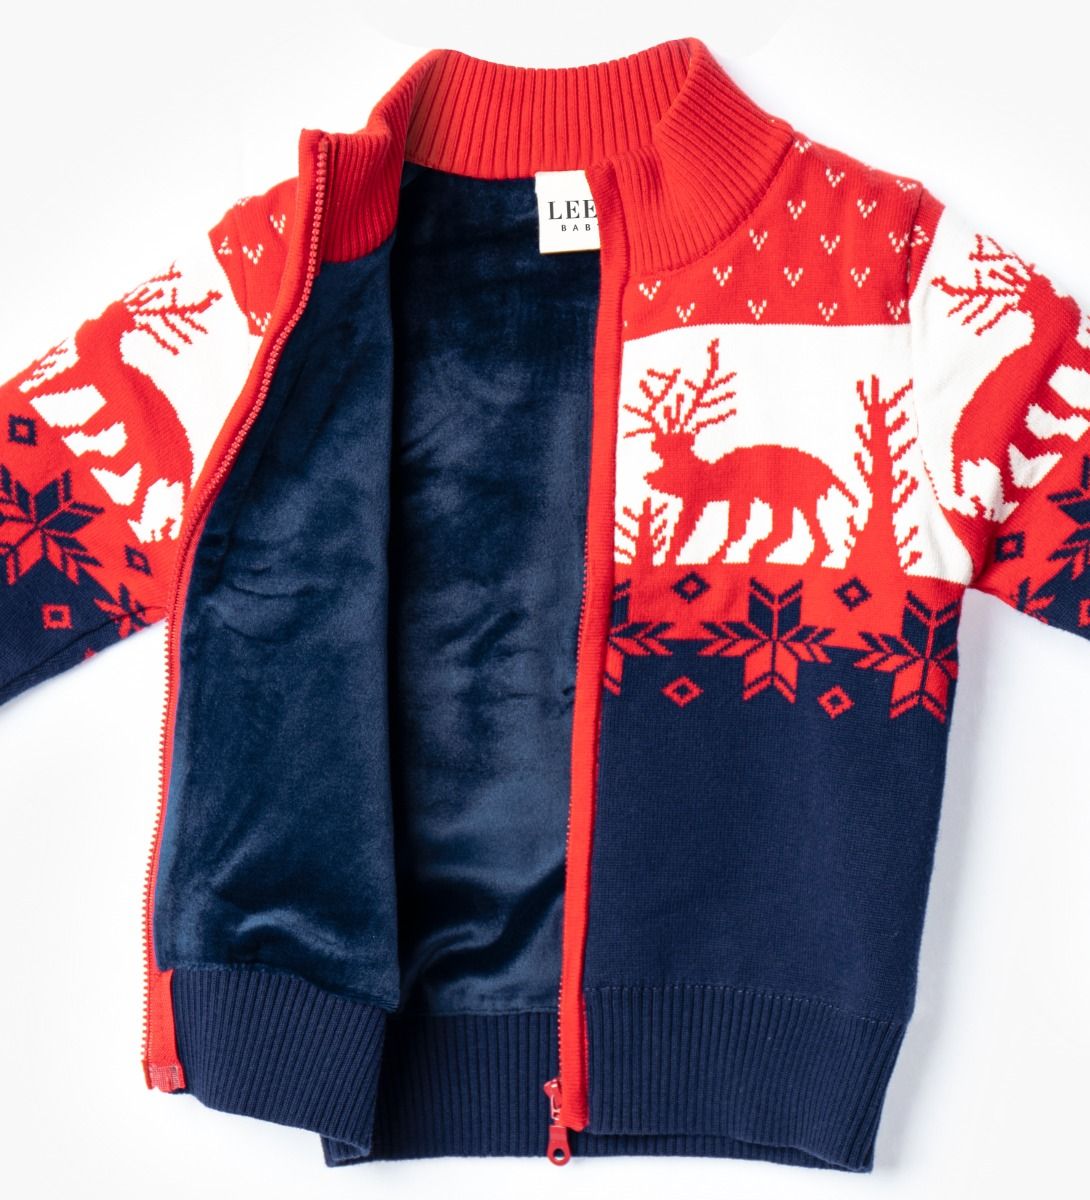 LEEZ Boys Multi-Color Zipper Cotton Sweater With Deer Patterns Red/ Navy